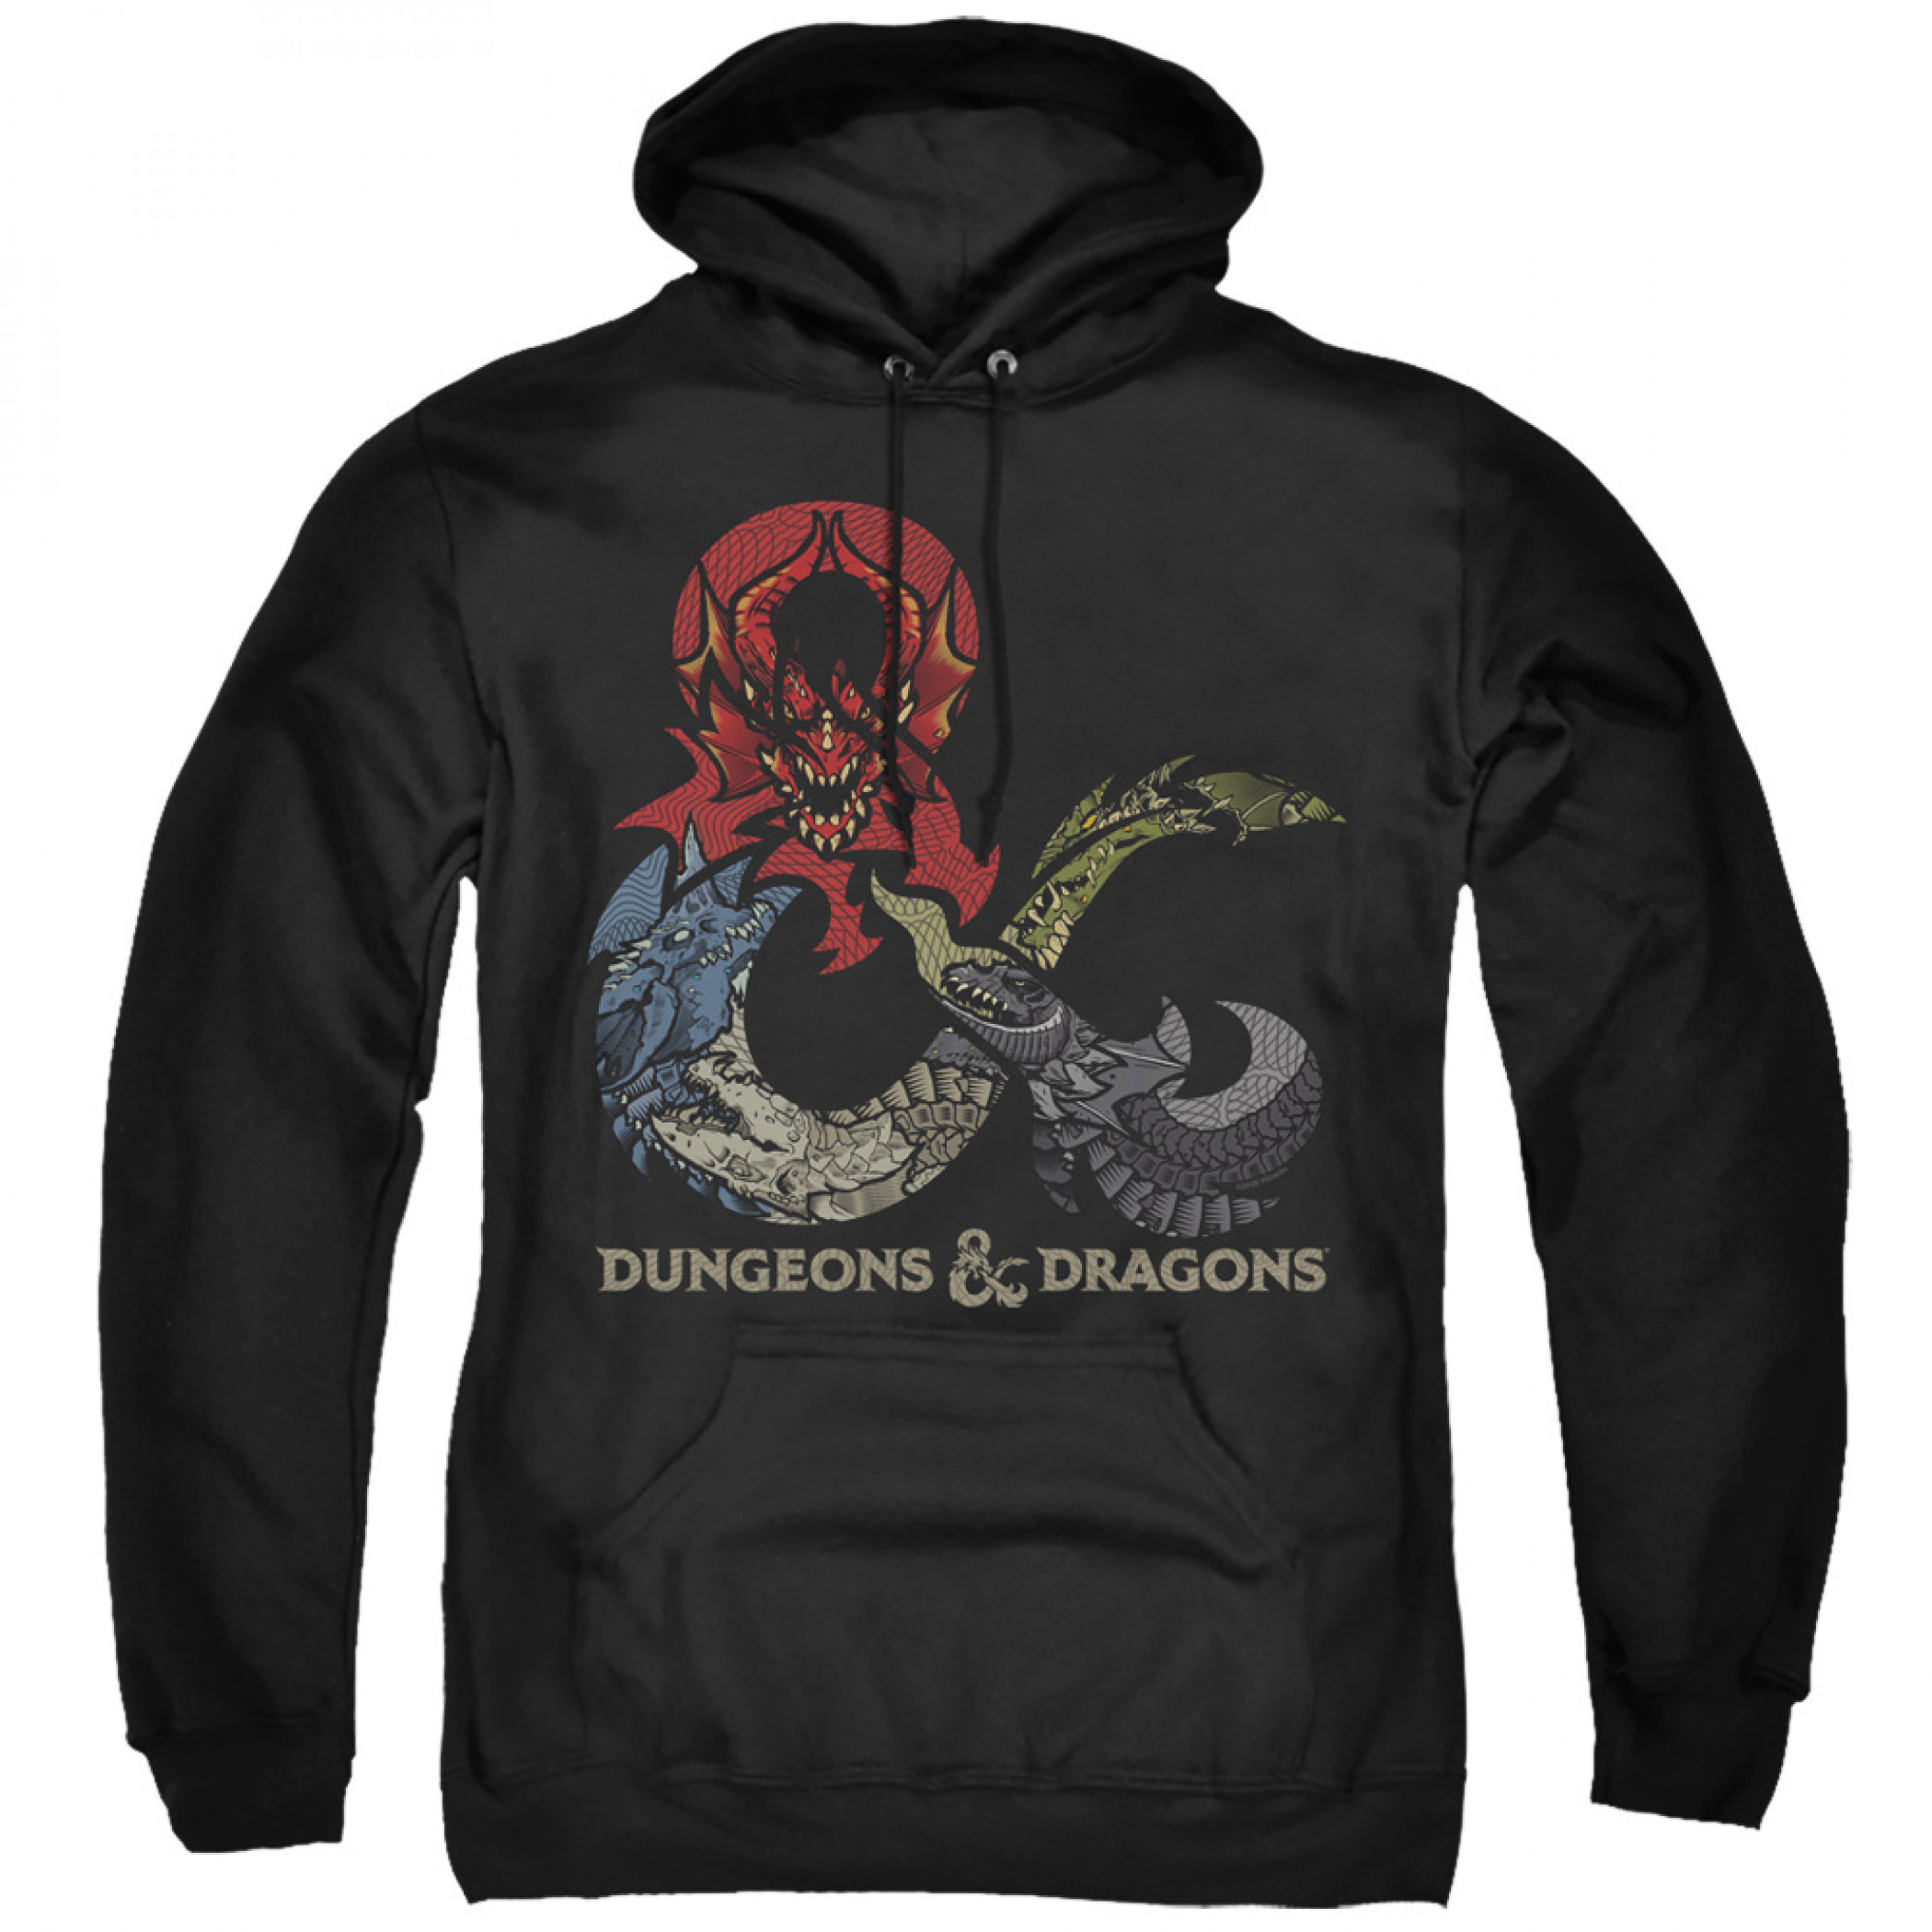 Dungeons & Dragons on Dragons on Dragons Hoodie